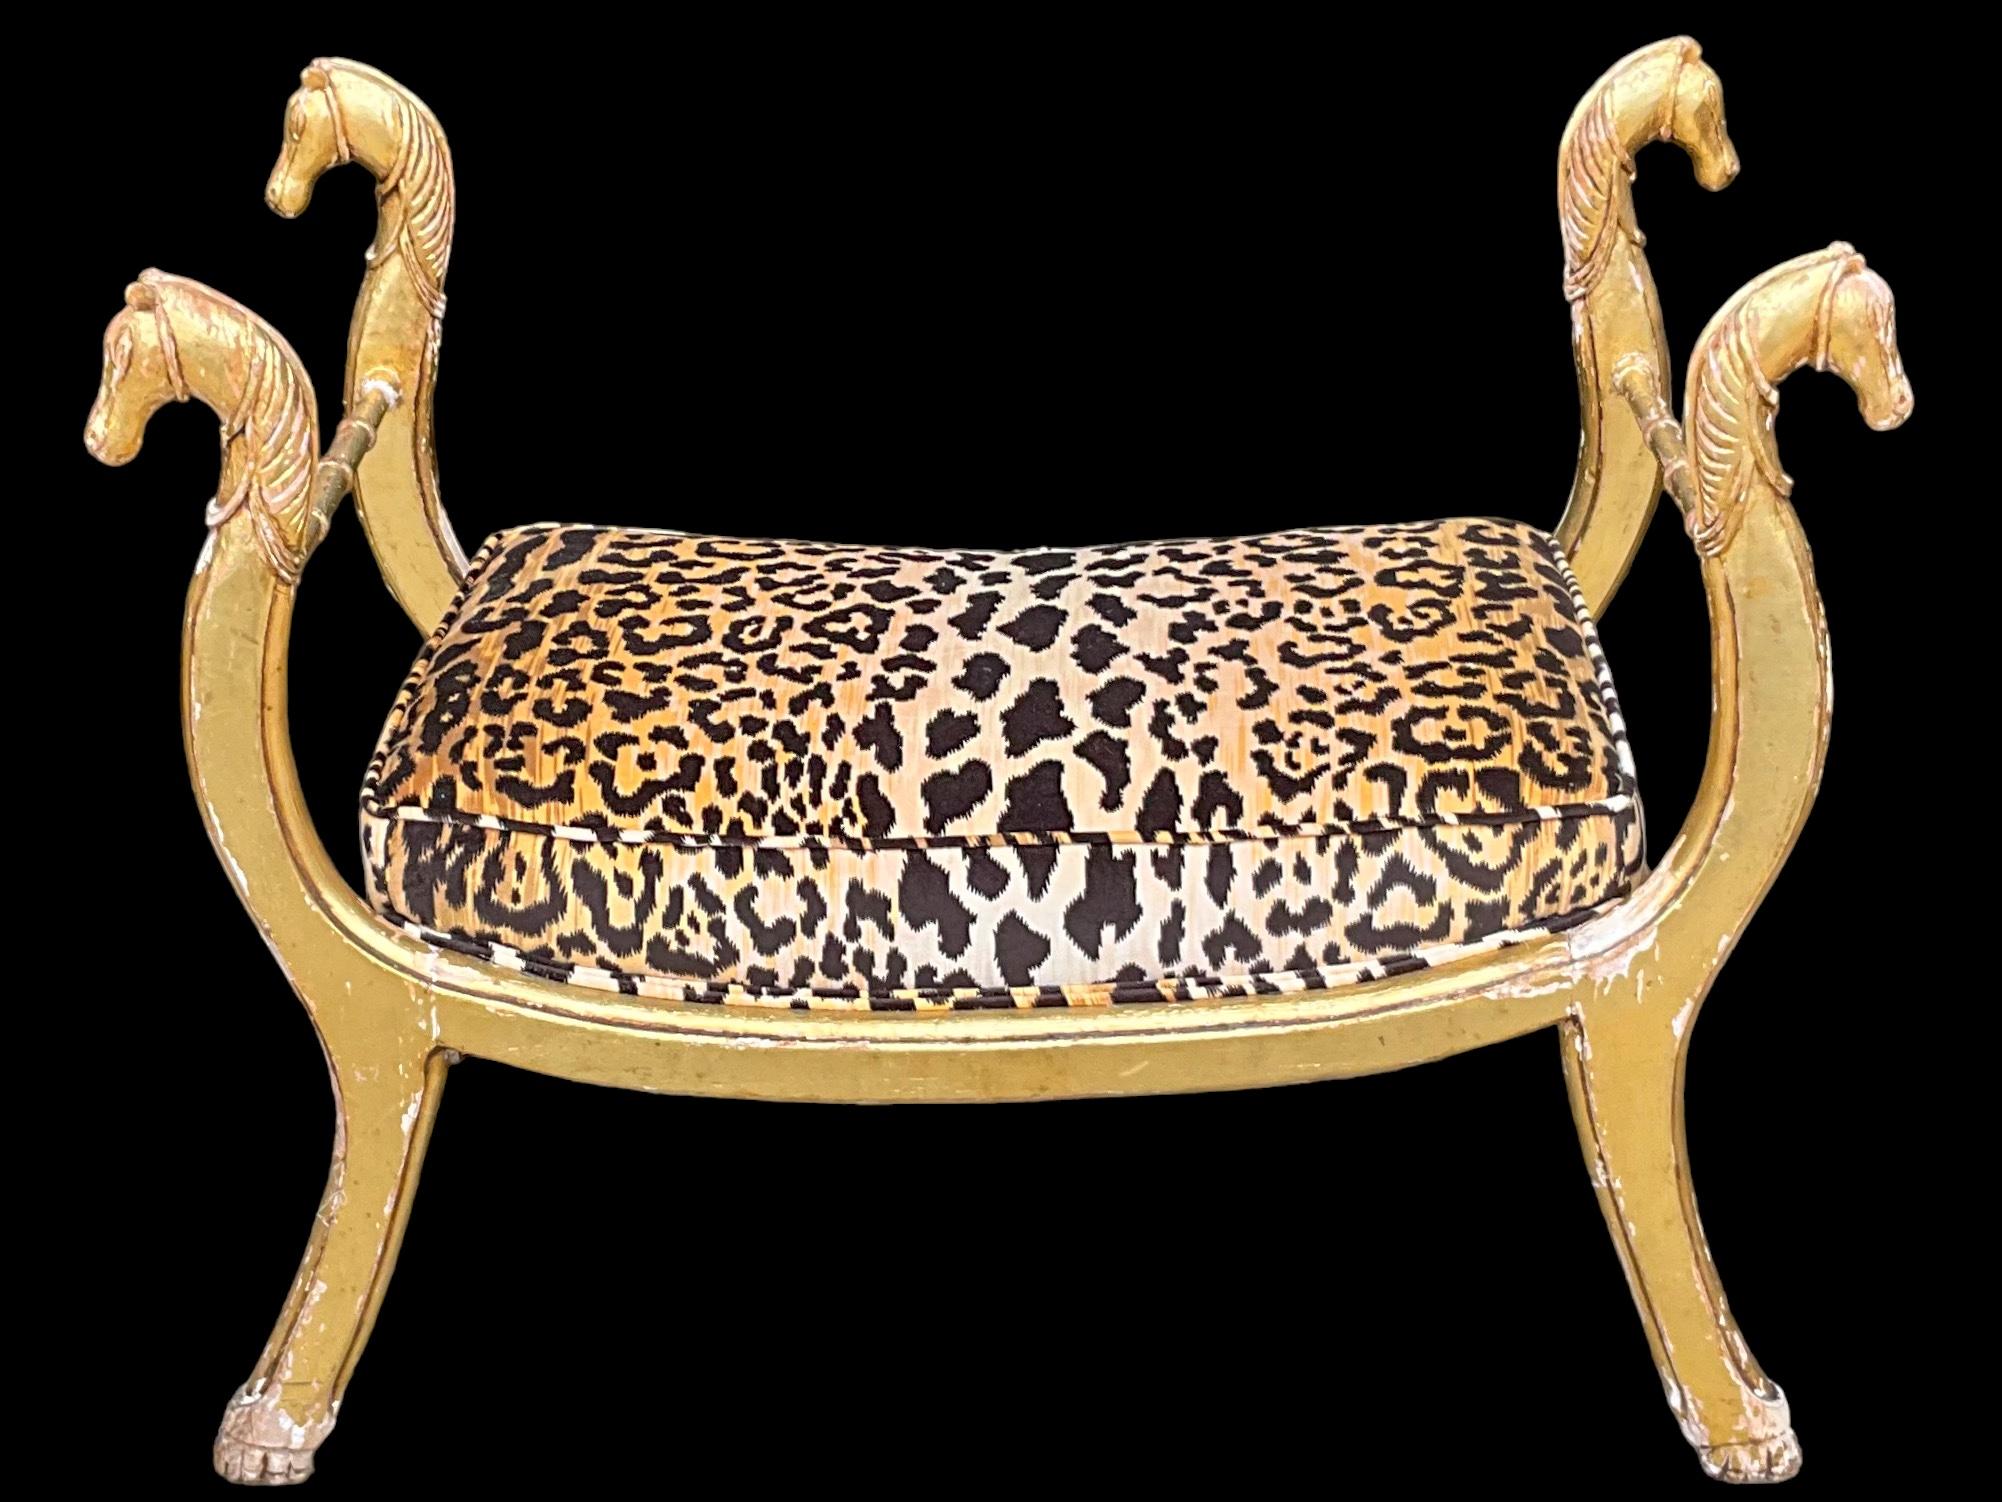 Neoclassical 19th-C. Neo-Classical Maison Jansen Style Giltwood Bench In Leopard Velvet  For Sale